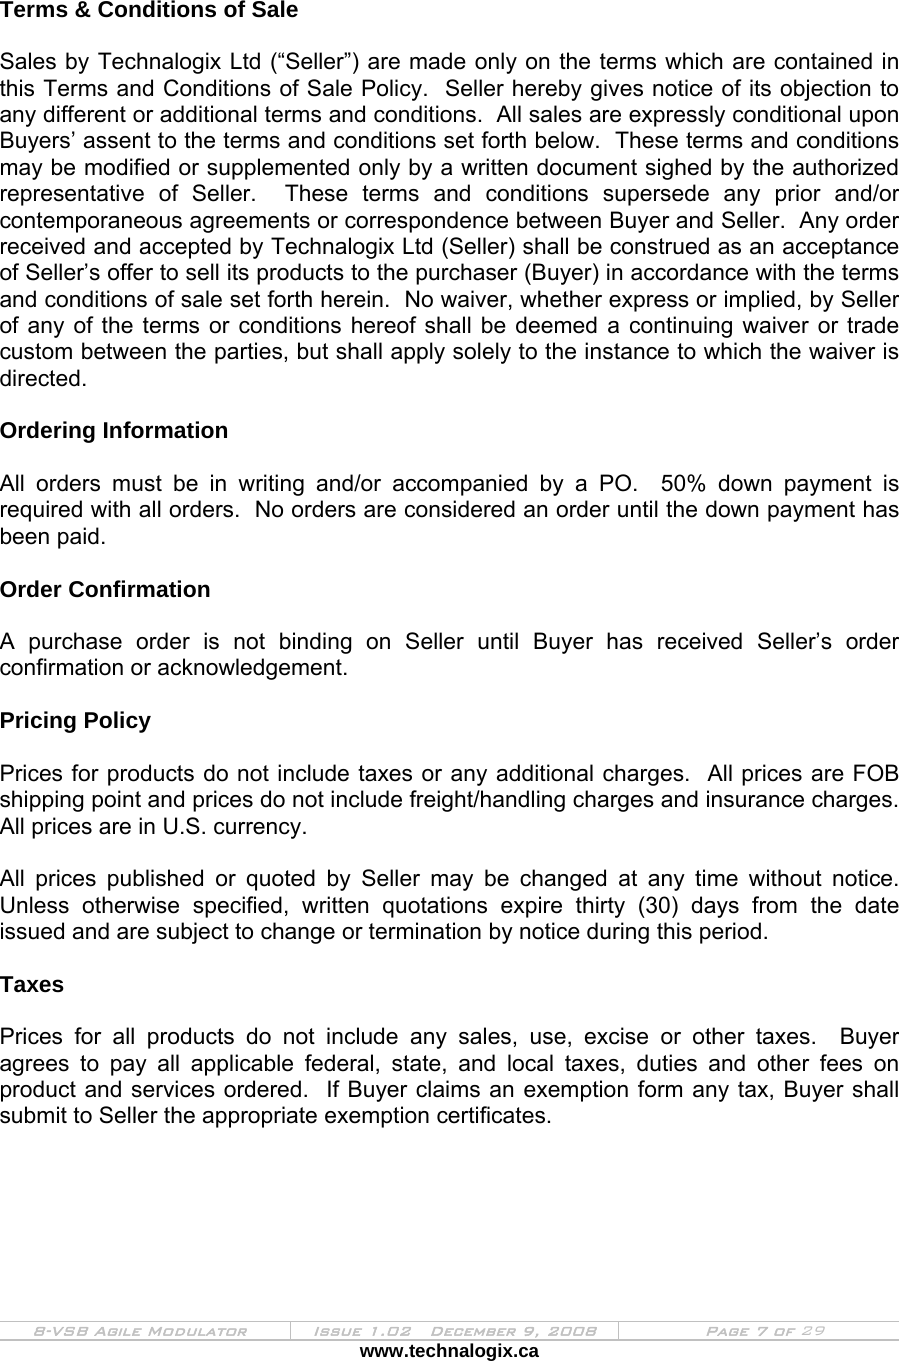  8-VSB Agile Modulator  Issue 1.02   December 9, 2008  Page 7 of 29 www.technalogix.ca    Terms &amp; Conditions of Sale  Sales by Technalogix Ltd (“Seller”) are made only on the terms which are contained in this Terms and Conditions of Sale Policy.  Seller hereby gives notice of its objection to any different or additional terms and conditions.  All sales are expressly conditional upon Buyers’ assent to the terms and conditions set forth below.  These terms and conditions may be modified or supplemented only by a written document sighed by the authorized representative of Seller.  These terms and conditions supersede any prior and/or contemporaneous agreements or correspondence between Buyer and Seller.  Any order received and accepted by Technalogix Ltd (Seller) shall be construed as an acceptance of Seller’s offer to sell its products to the purchaser (Buyer) in accordance with the terms and conditions of sale set forth herein.  No waiver, whether express or implied, by Seller of any of the terms or conditions hereof shall be deemed a continuing waiver or trade custom between the parties, but shall apply solely to the instance to which the waiver is directed.  Ordering Information  All orders must be in writing and/or accompanied by a PO.  50% down payment is required with all orders.  No orders are considered an order until the down payment has been paid.  Order Confirmation  A purchase order is not binding on Seller until Buyer has received Seller’s order confirmation or acknowledgement.   Pricing Policy  Prices for products do not include taxes or any additional charges.  All prices are FOB shipping point and prices do not include freight/handling charges and insurance charges.  All prices are in U.S. currency.  All prices published or quoted by Seller may be changed at any time without notice.  Unless otherwise specified, written quotations expire thirty (30) days from the date issued and are subject to change or termination by notice during this period.  Taxes  Prices for all products do not include any sales, use, excise or other taxes.  Buyer agrees to pay all applicable federal, state, and local taxes, duties and other fees on product and services ordered.  If Buyer claims an exemption form any tax, Buyer shall submit to Seller the appropriate exemption certificates.  